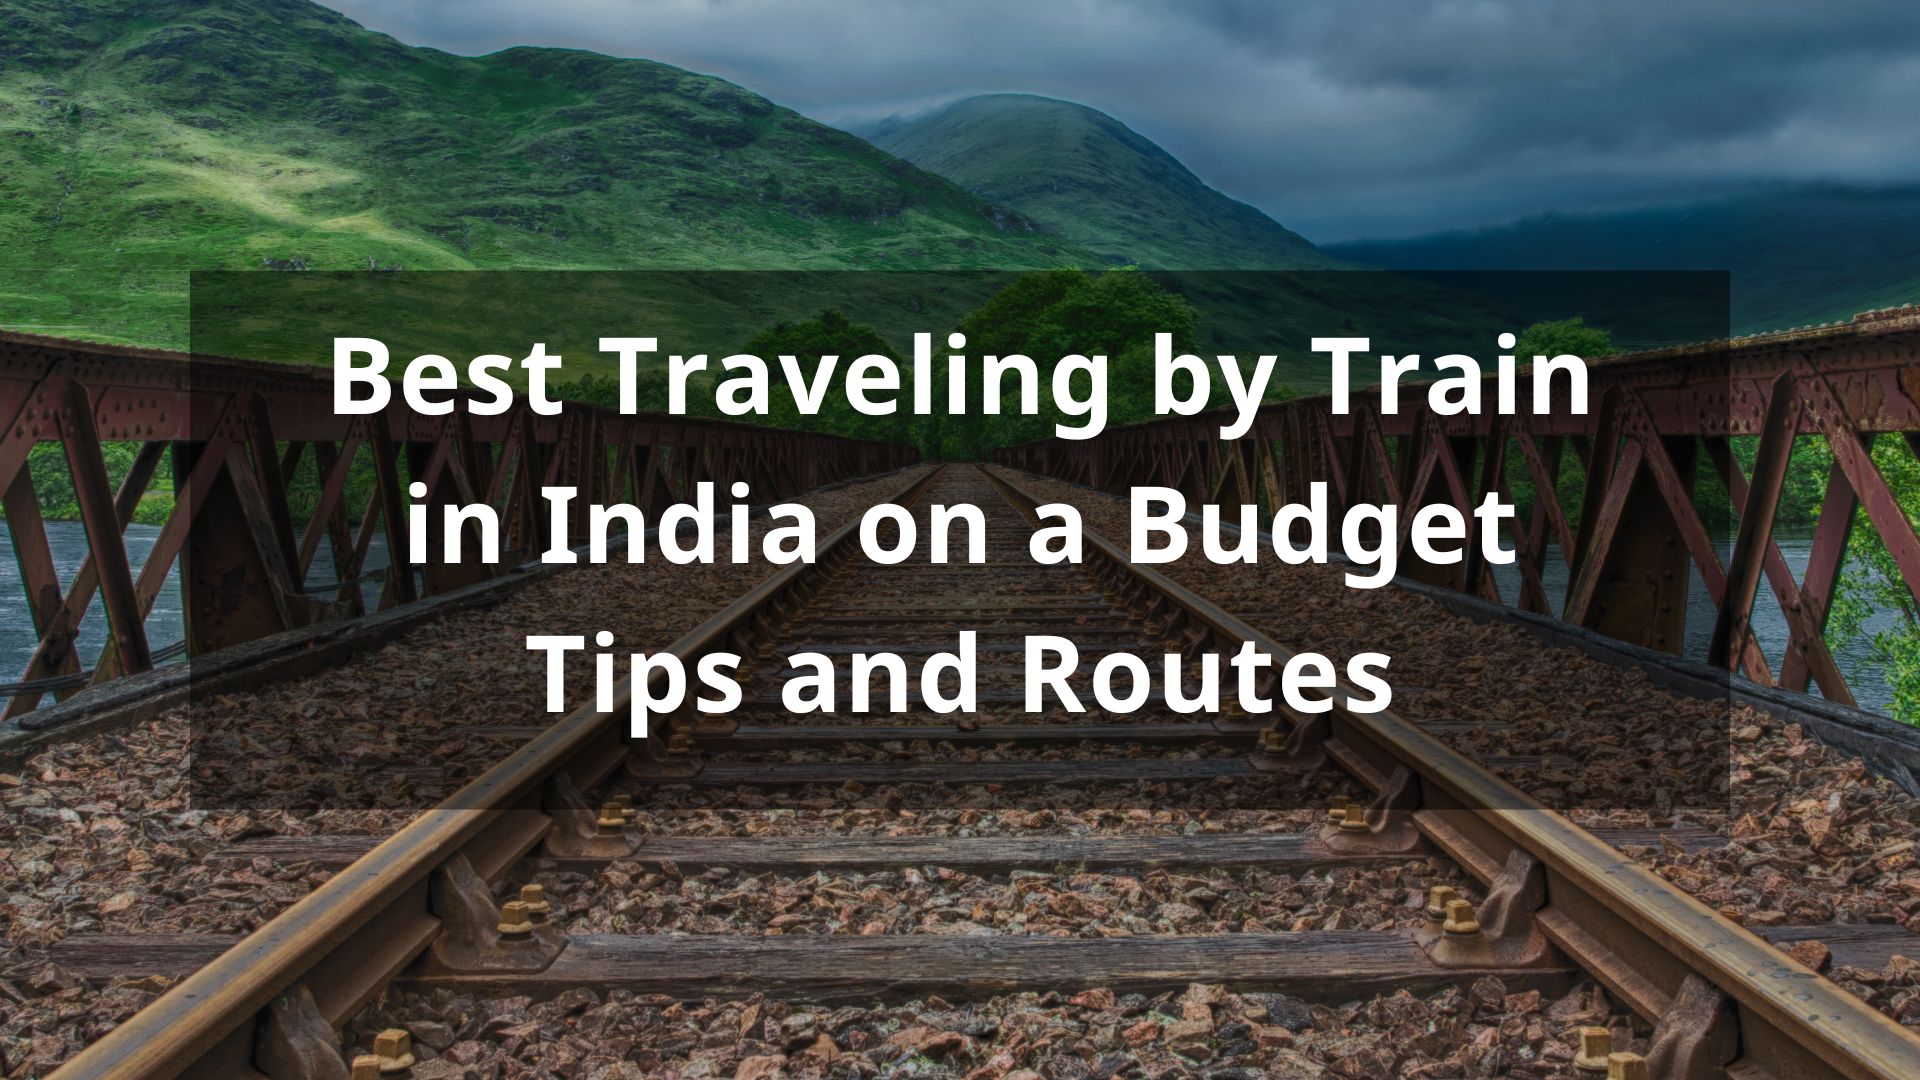 Best Traveling by Train in India on a Budget: Tips and Routes 2023